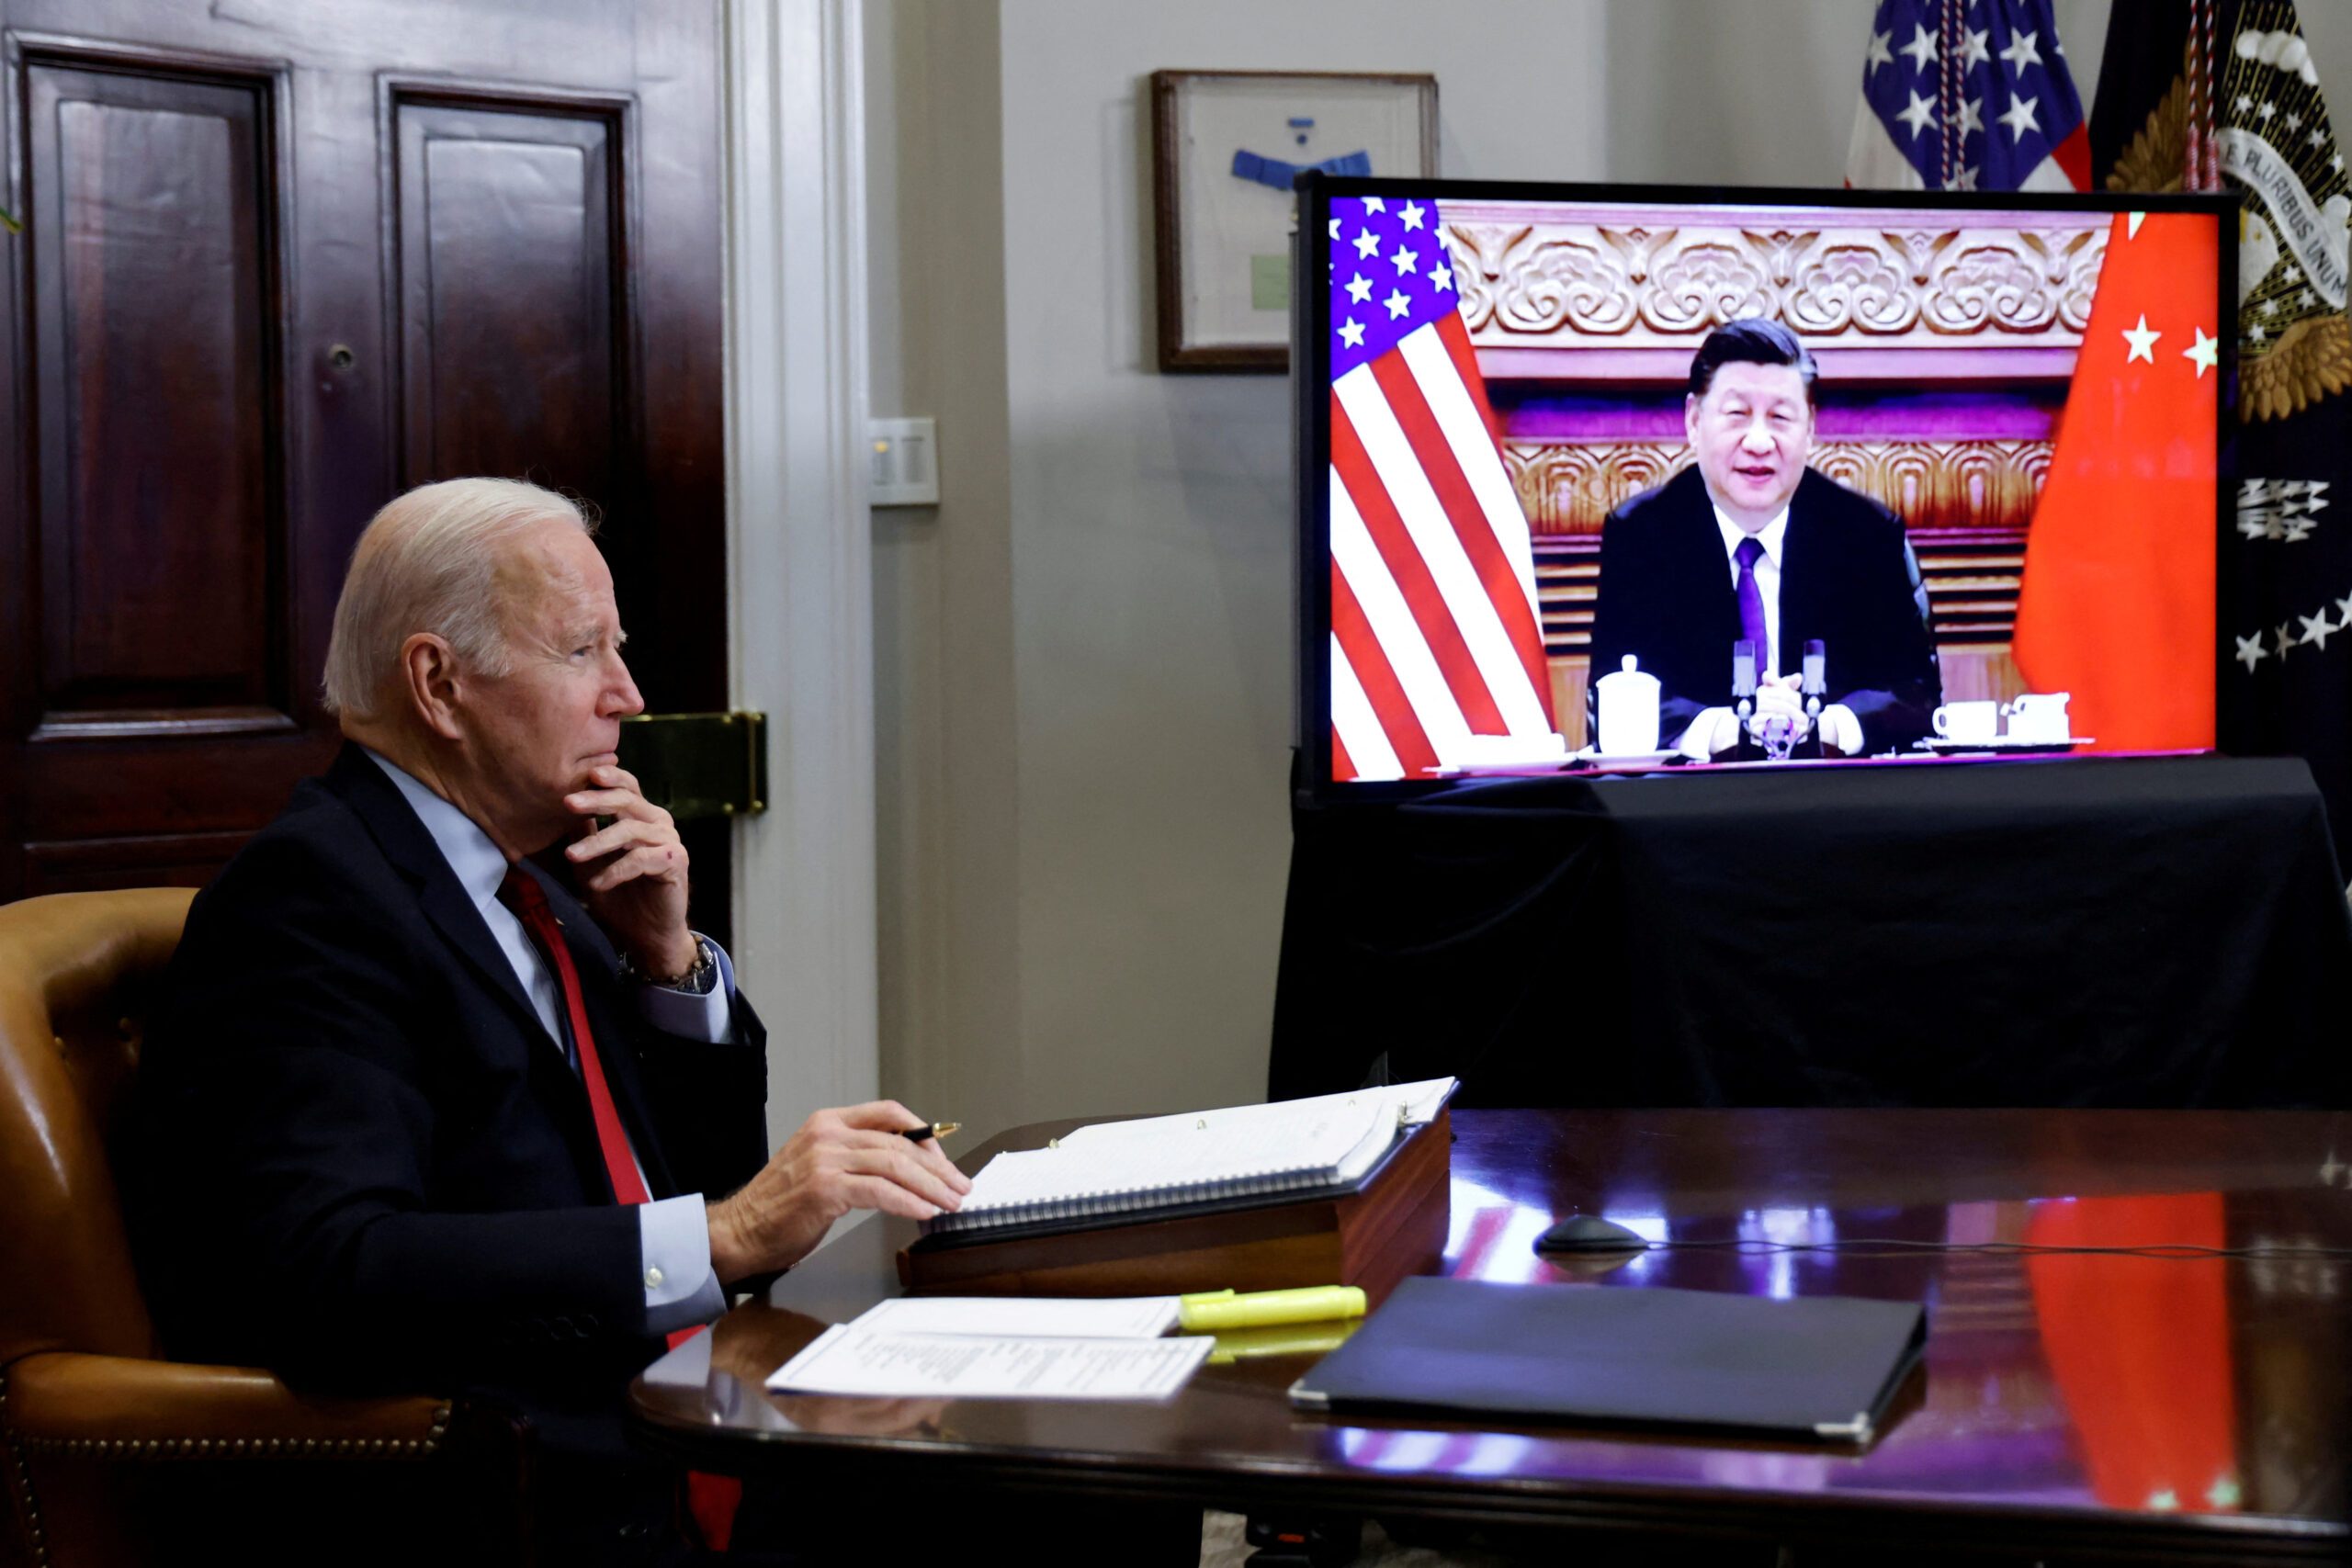 Biden says won’t veer into conflict with China, as first summit ends in Asia